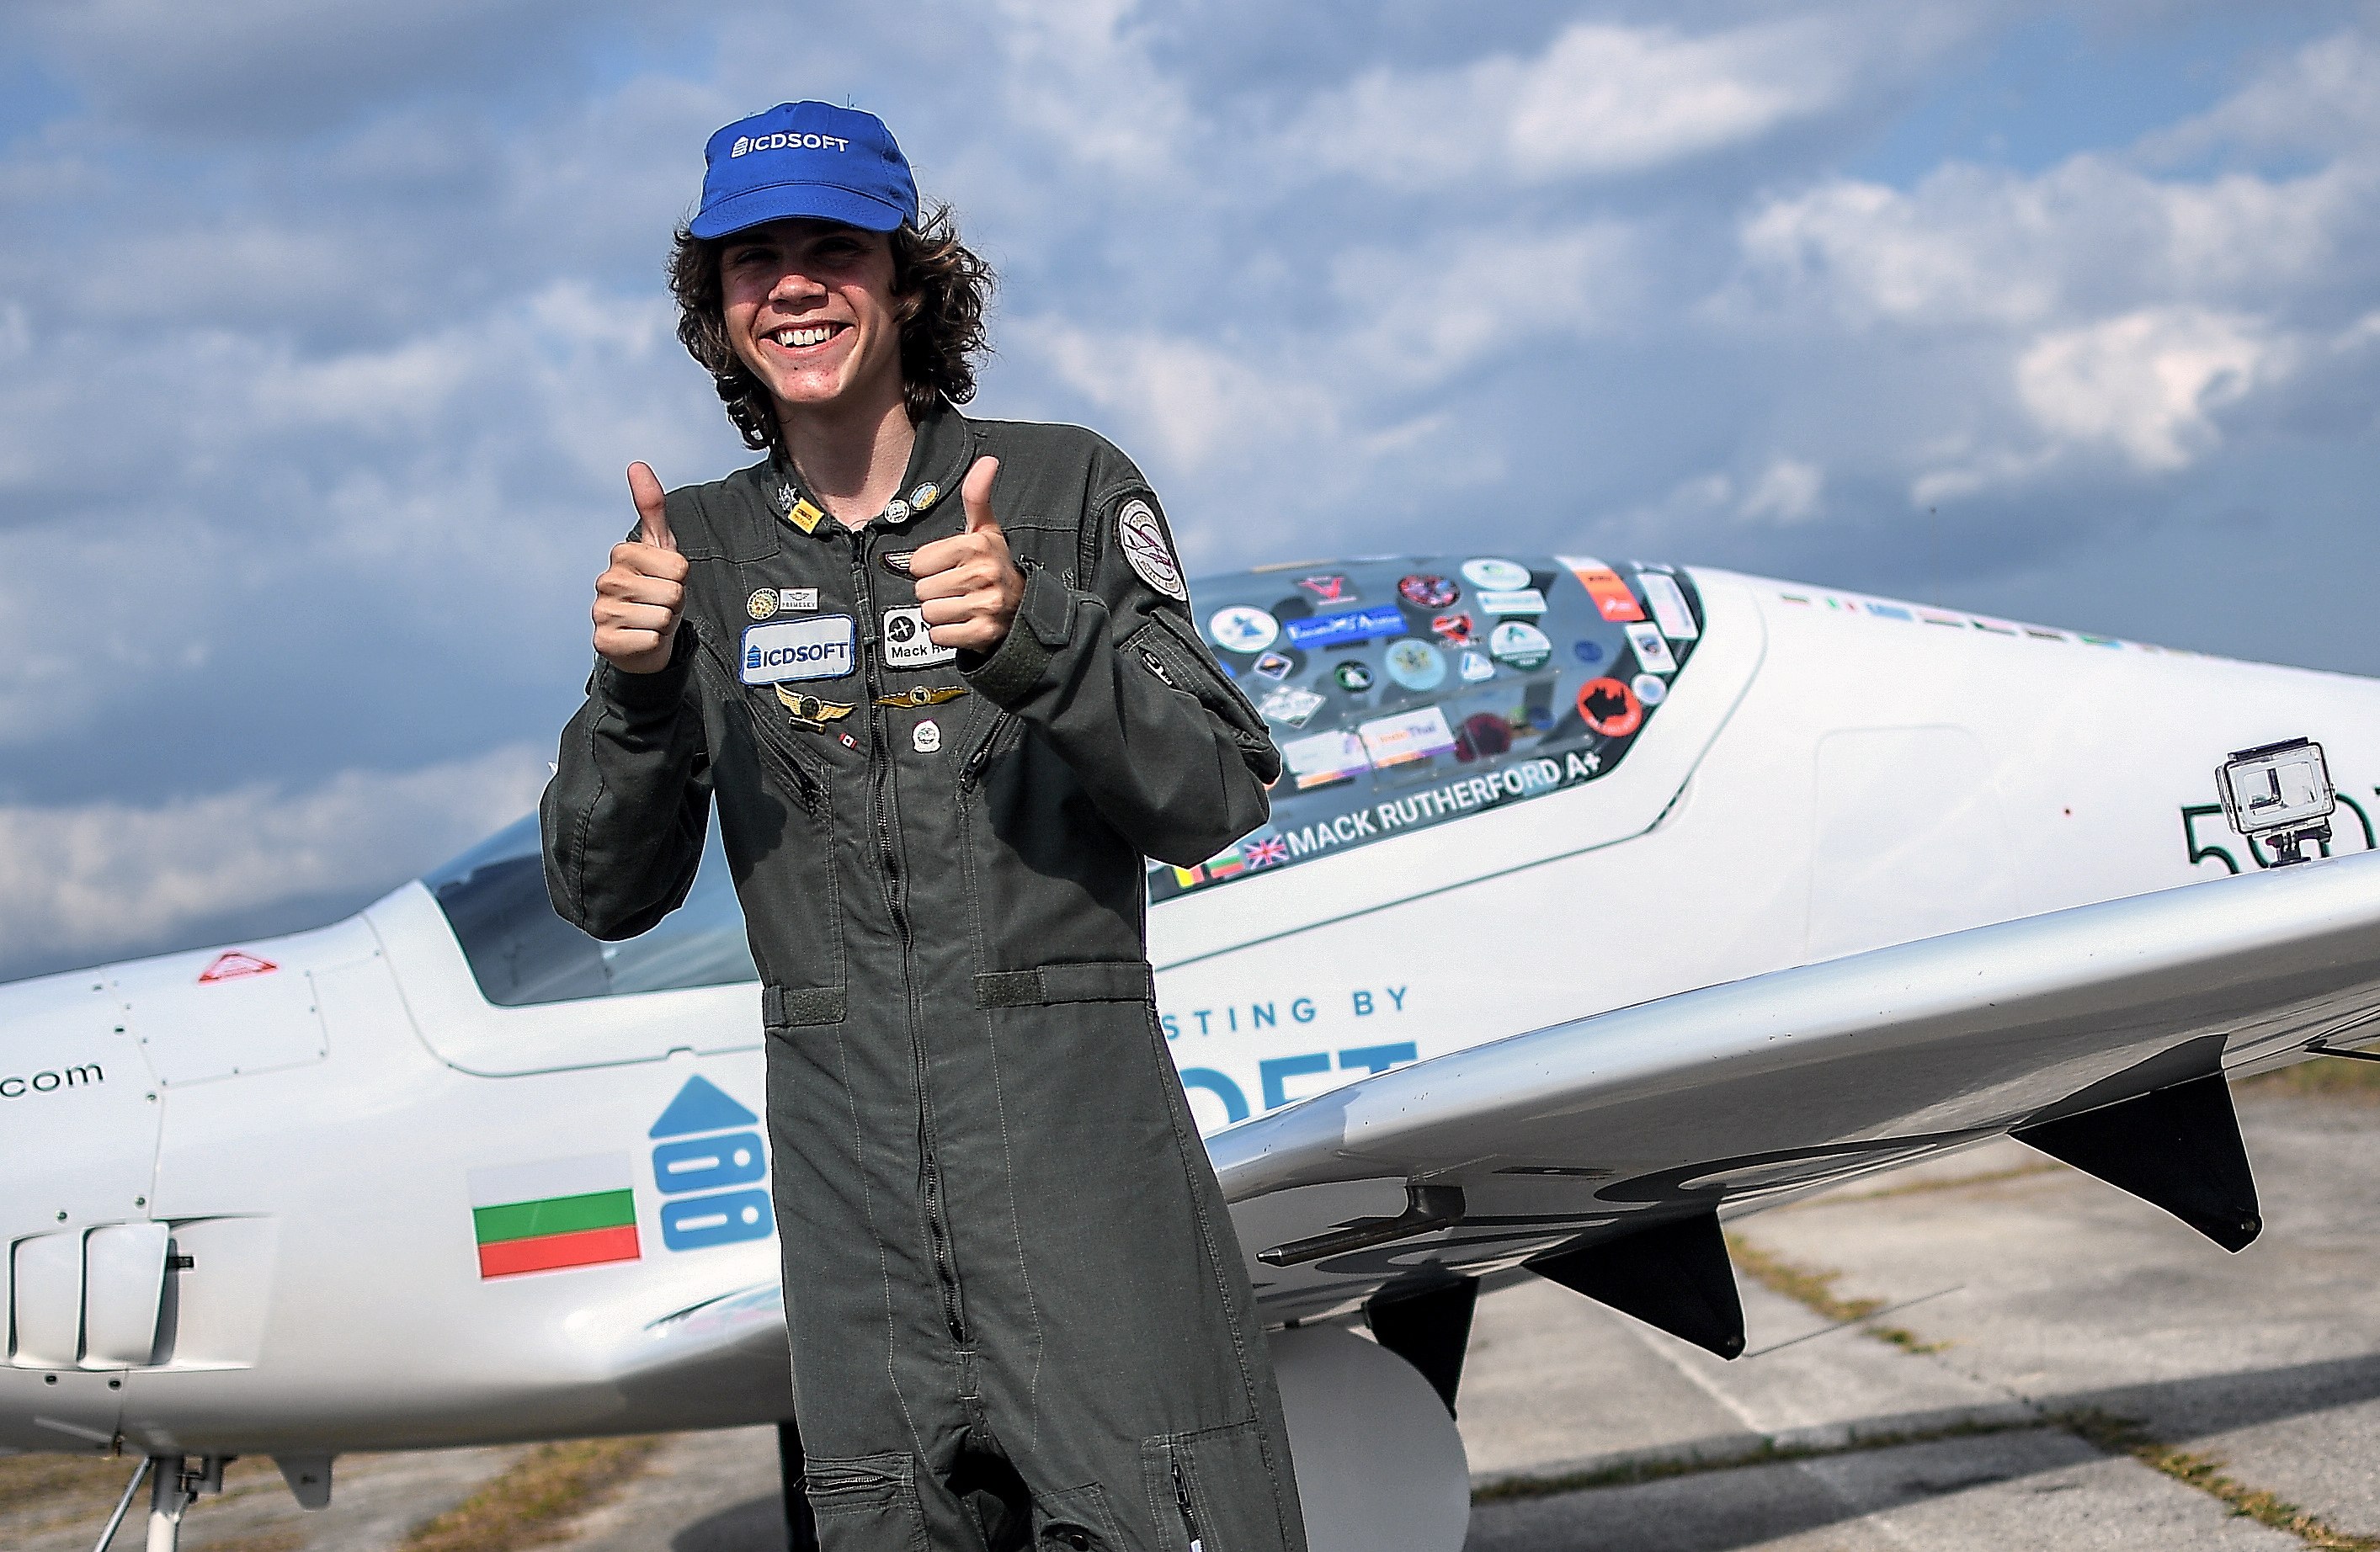 17-year-old Mack Rutherford succeeded in his attempt to become the youngest person to fly around the world solo in a small plane and broke the Guinness world record on Wednesday. Photo: EPA-EFE